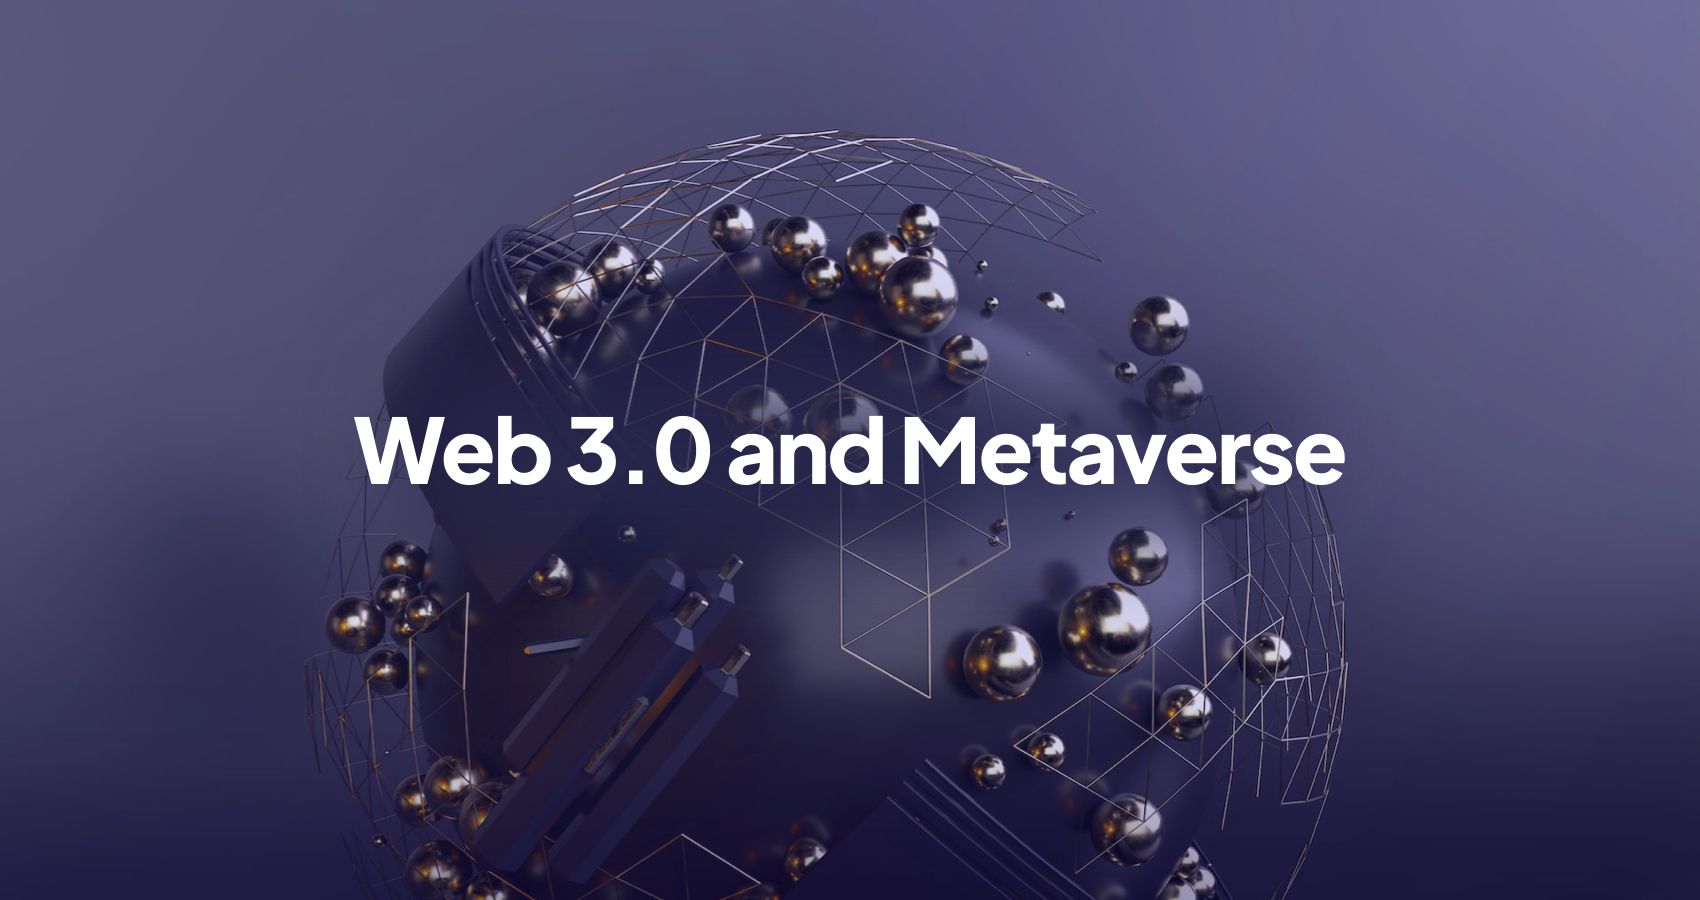 What is the future of Web3 and metaverse?